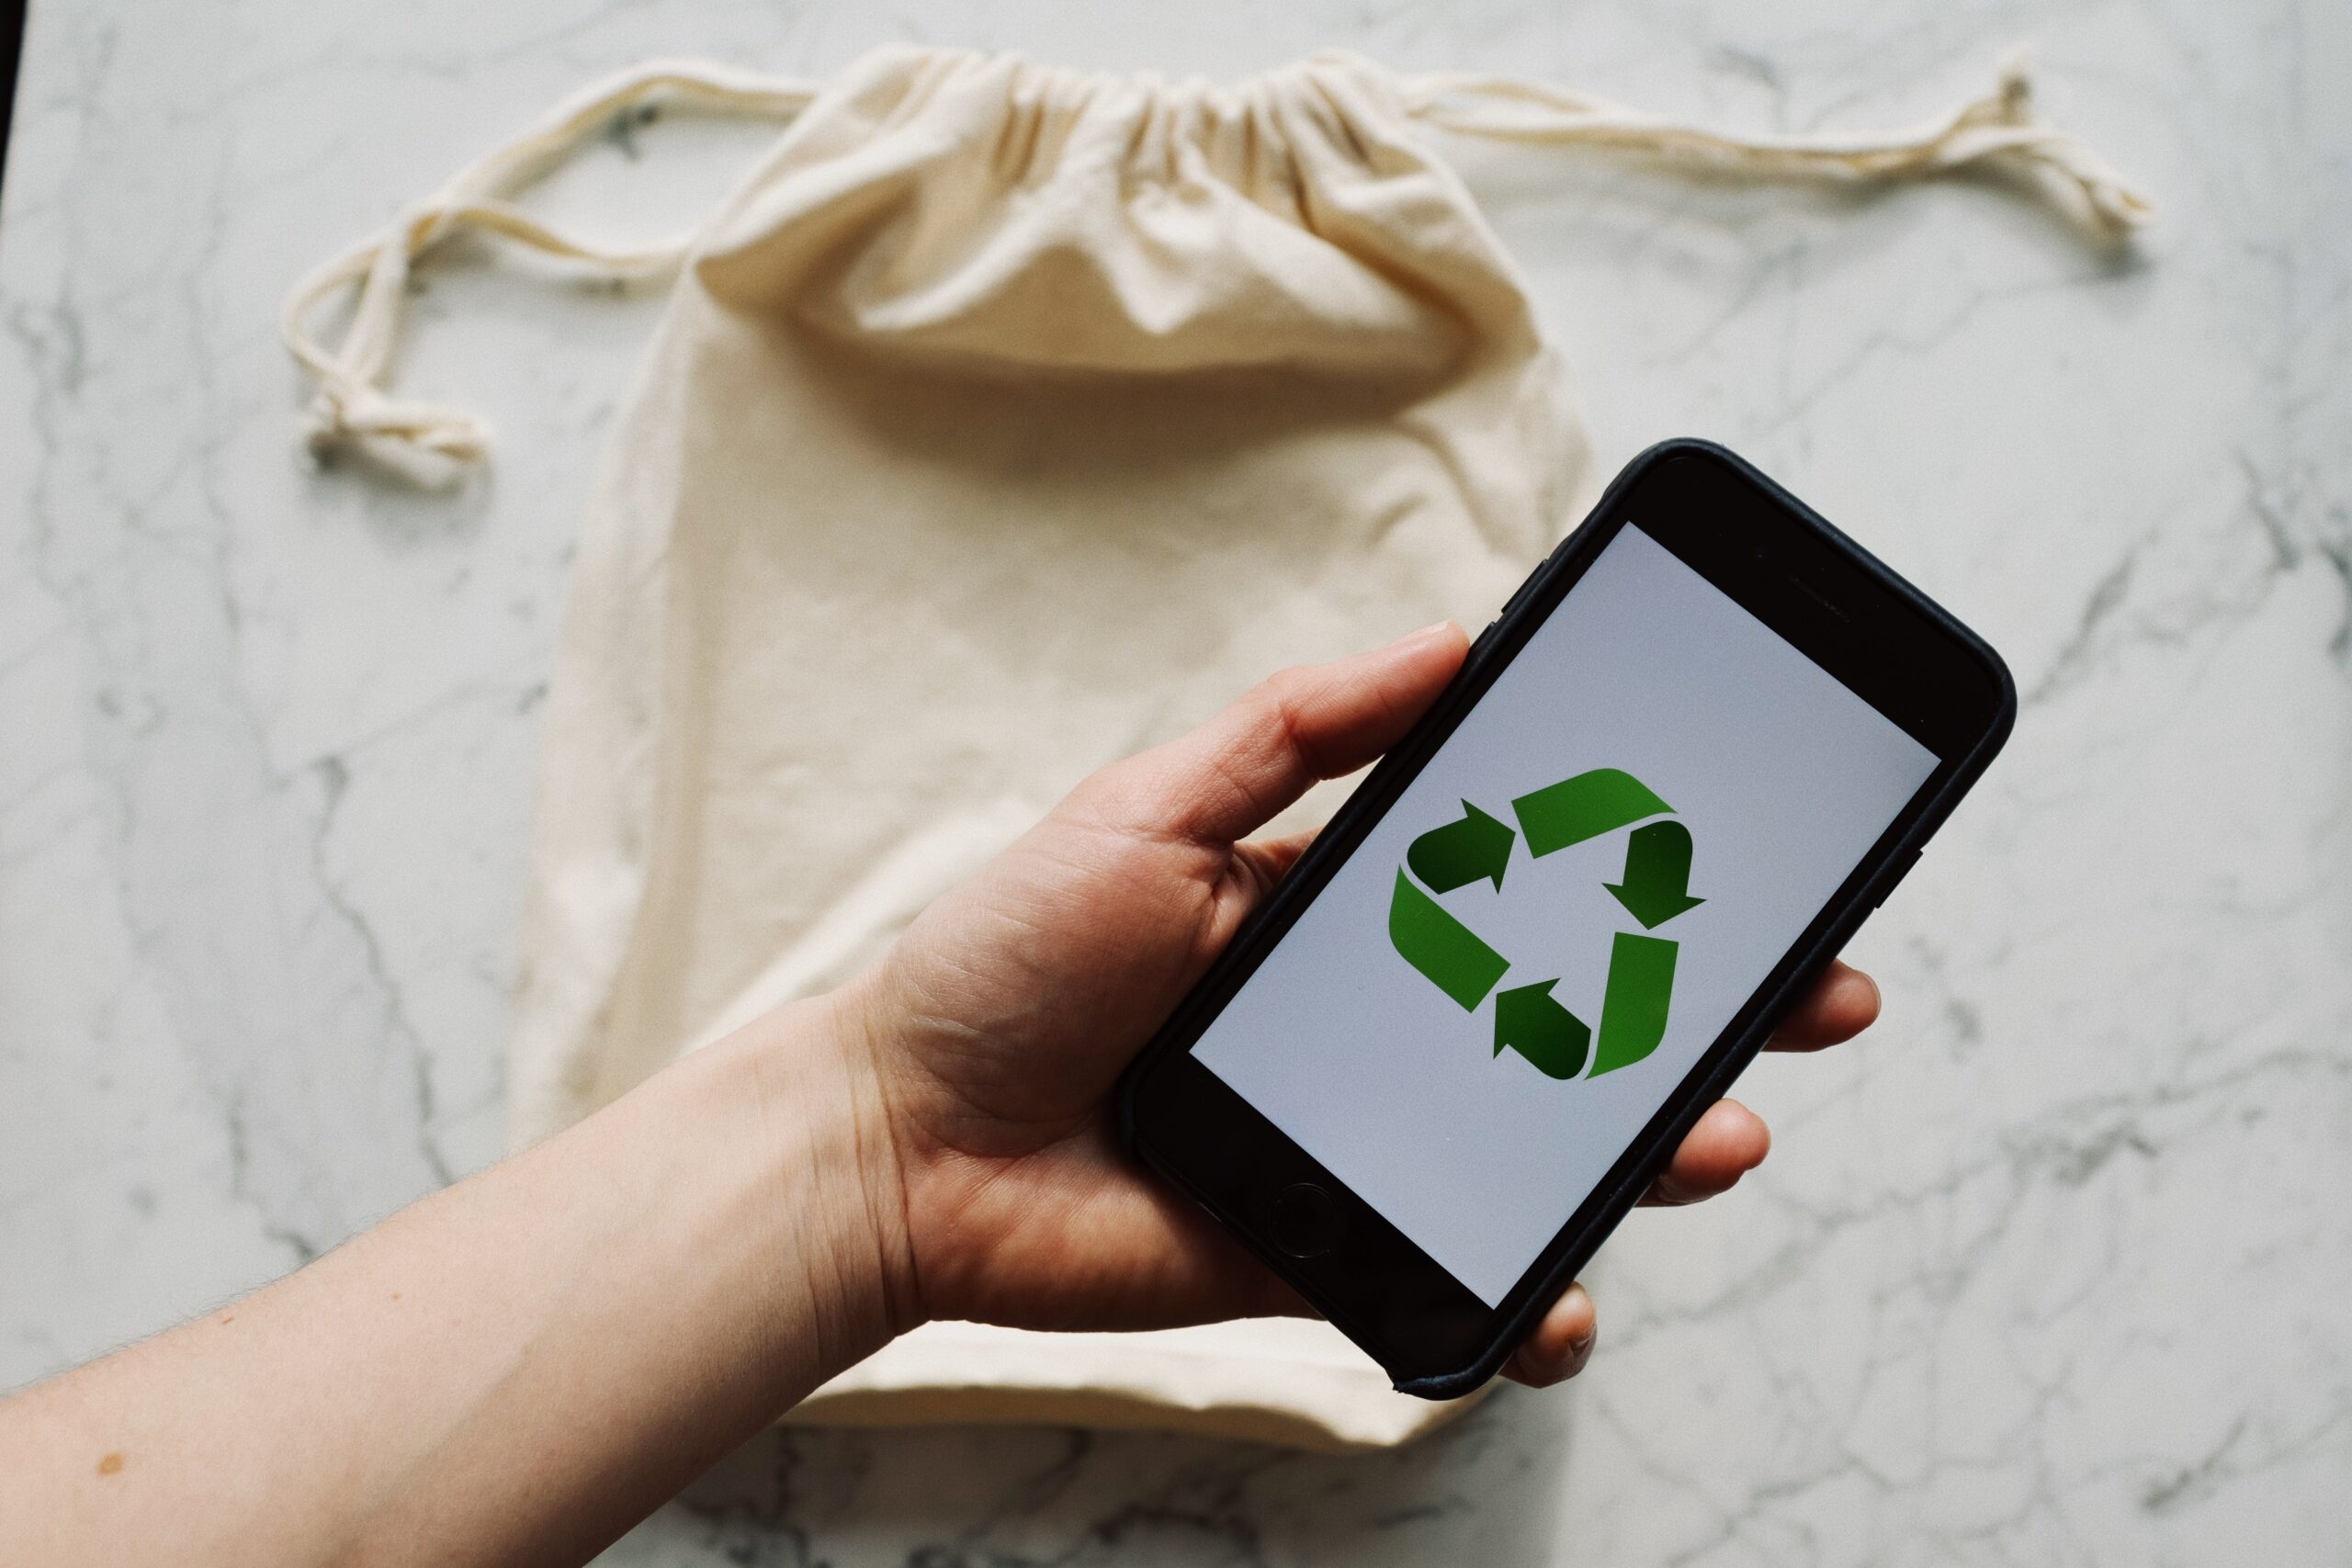 Showing E-waste recycle symbol on mobile phone screen Stock Photo